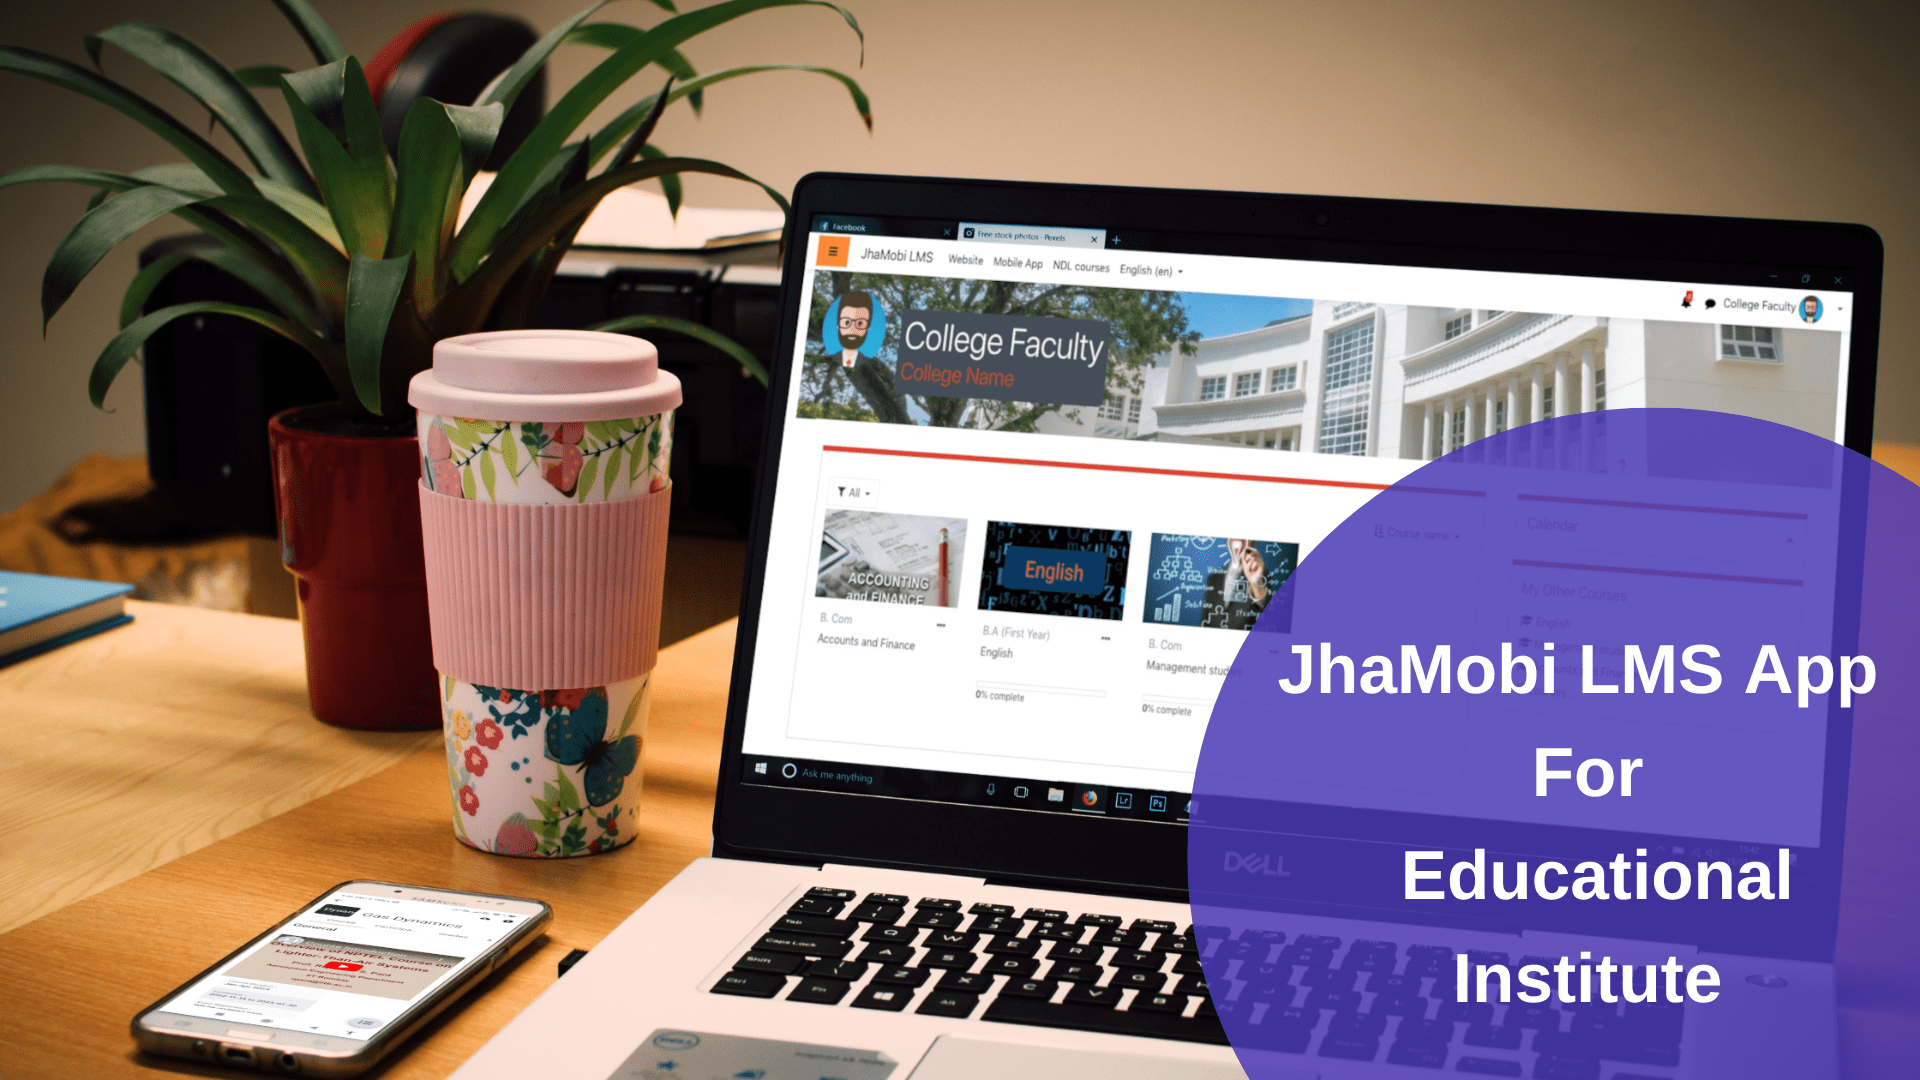 JhaMobi LMS: Software solution for Educational Institute